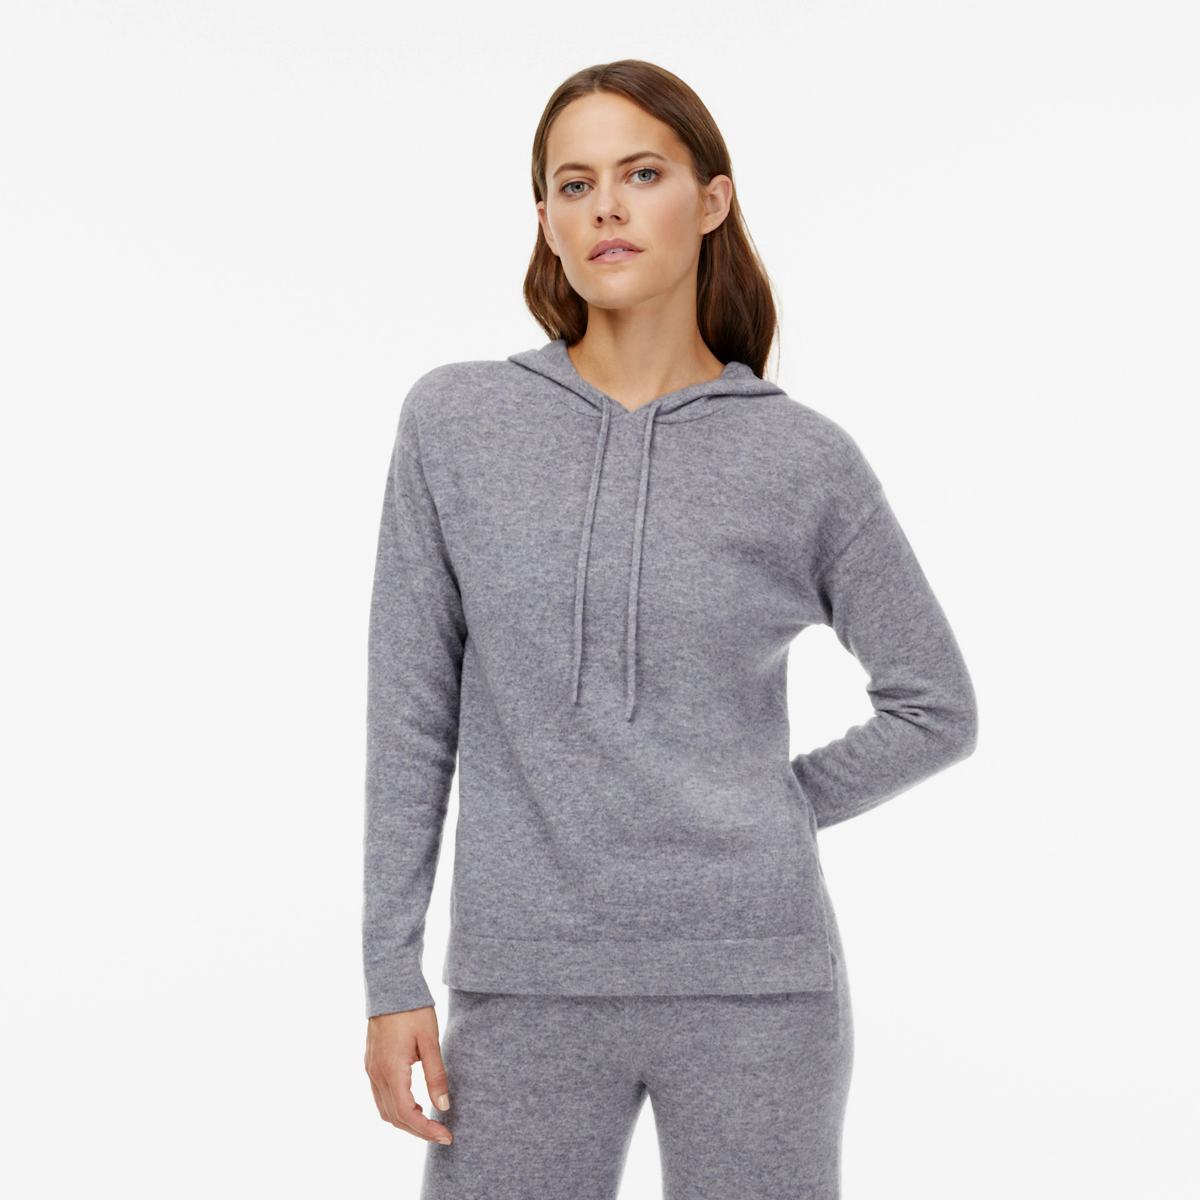 Recycled_Cashmere_Hoodie_Gray_Womens_OnFigure_1x1_1376.jpg